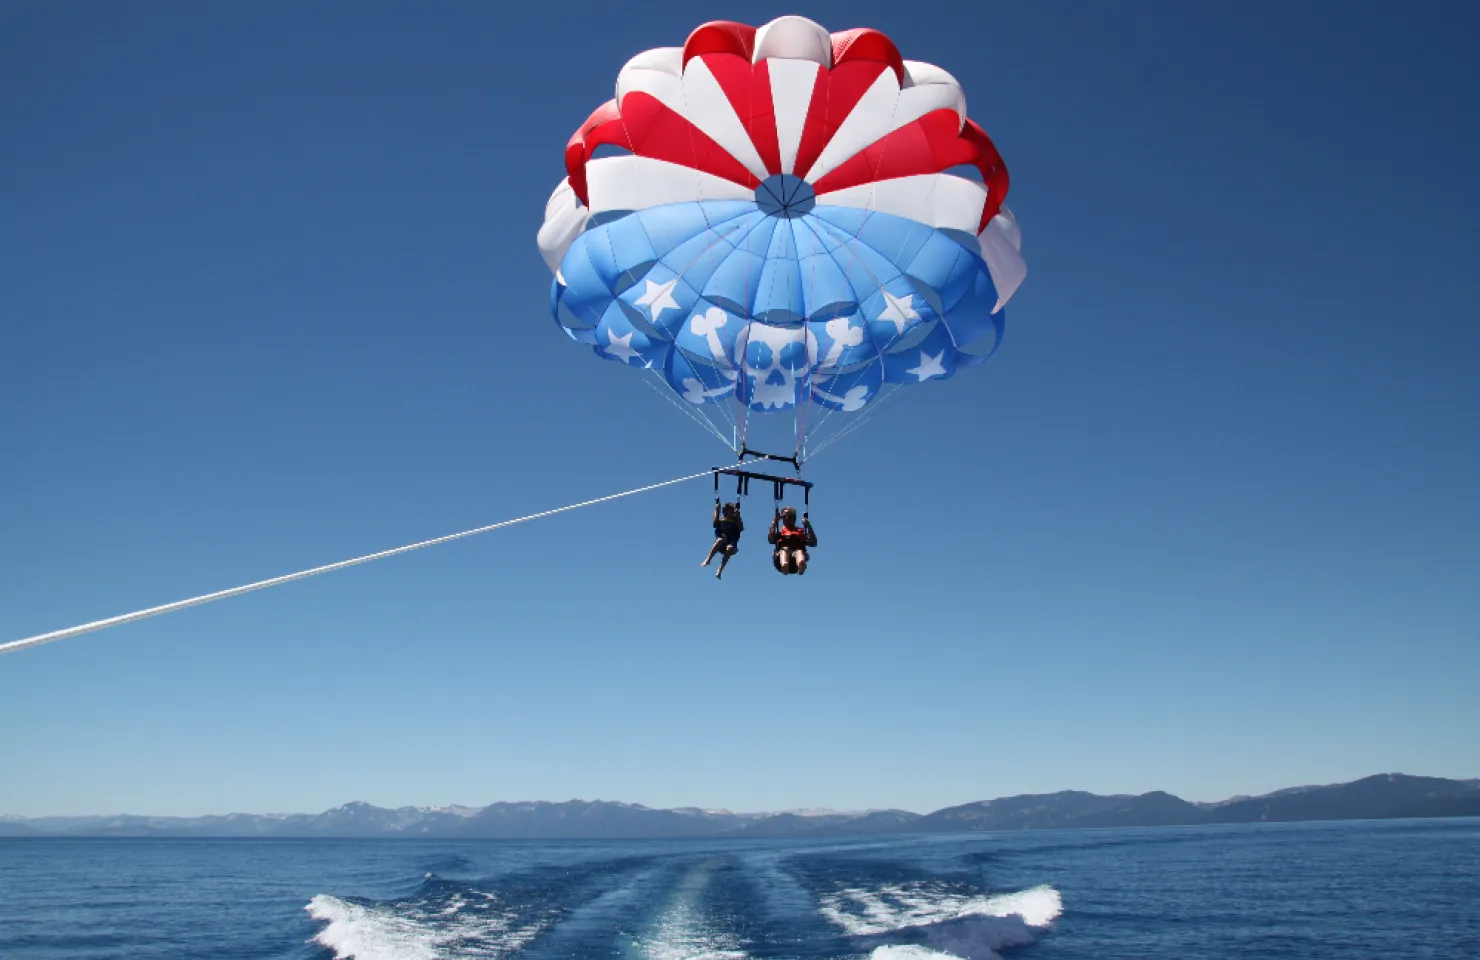 Parasailing In the Algarve - Algarve Boat Trips and Tours - Vilamoura 